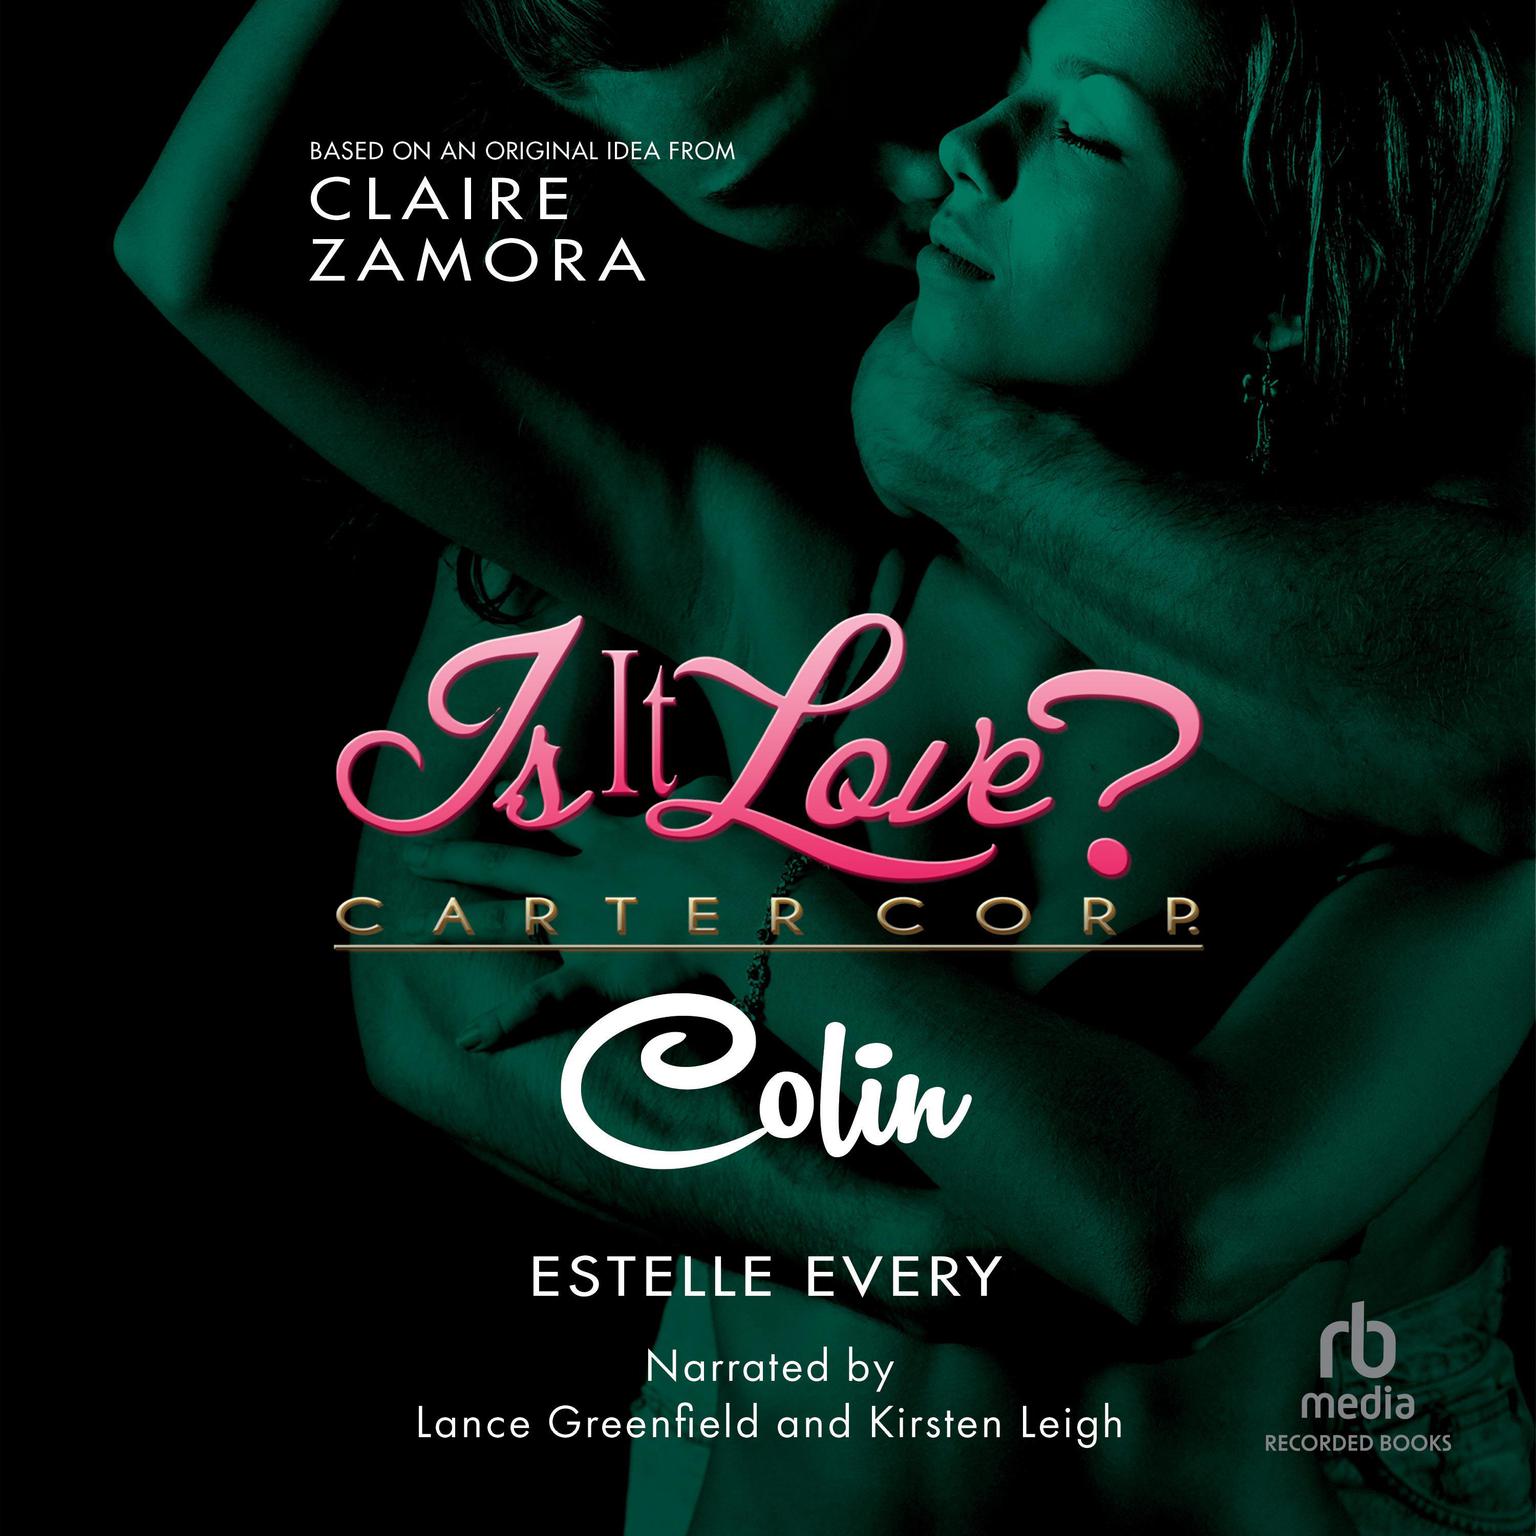 Is It Love? Carter Corp. Colin Audiobook, by Claire Zamora